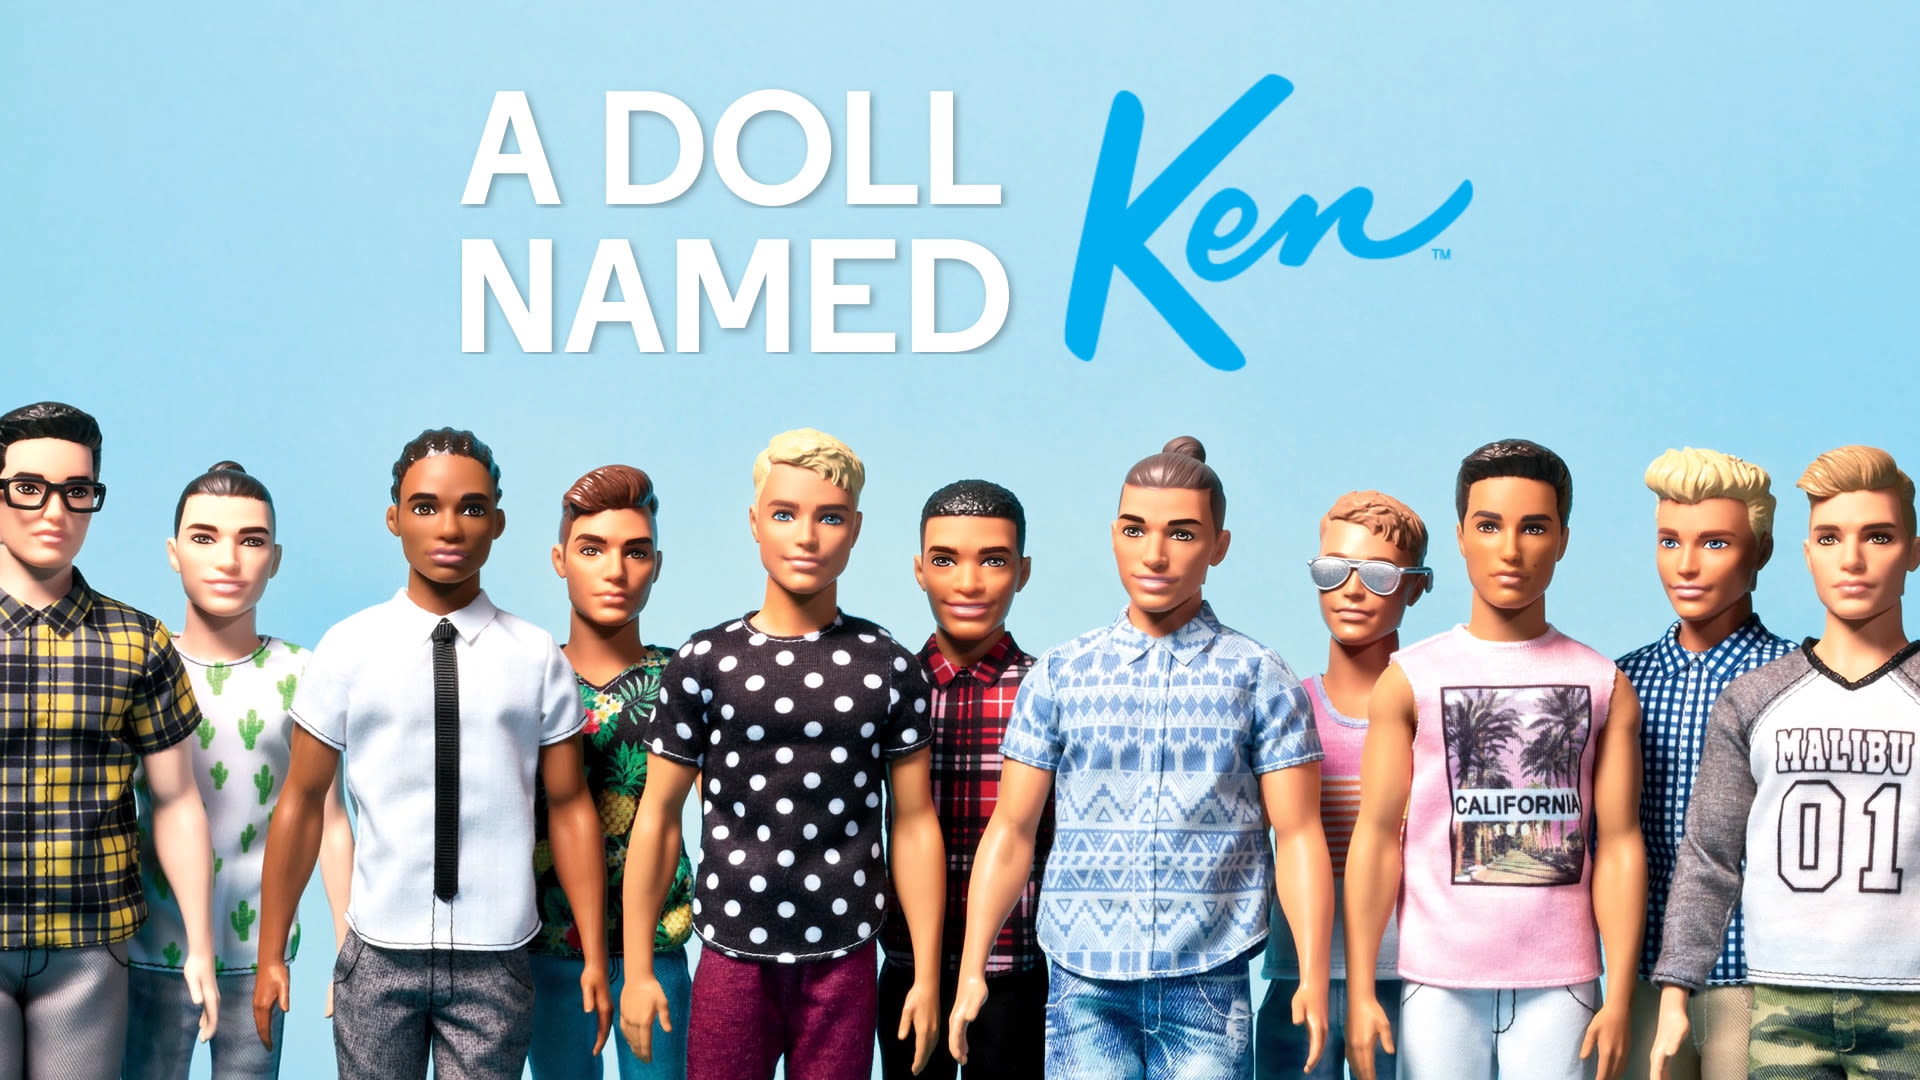 2. Blue Haired Ken Doll - wide 2